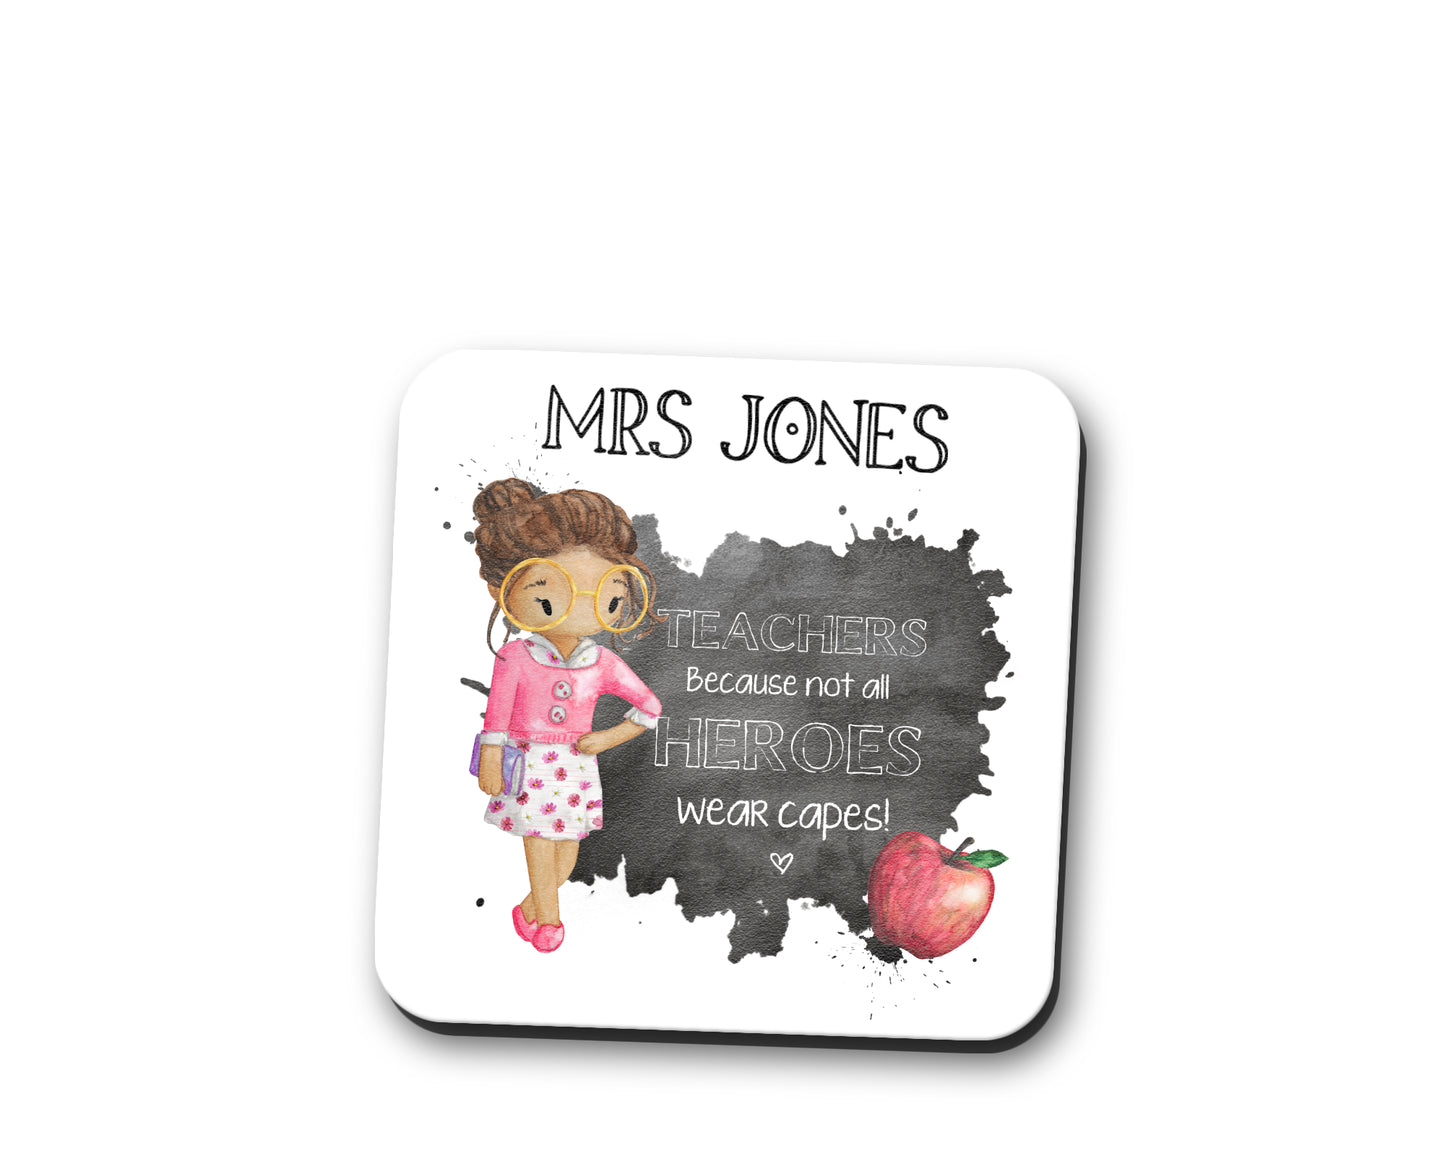 Hardboard coasters featuring a female teacher design with the text 'Teachers because not all heroes wear capes!' Can be personalised